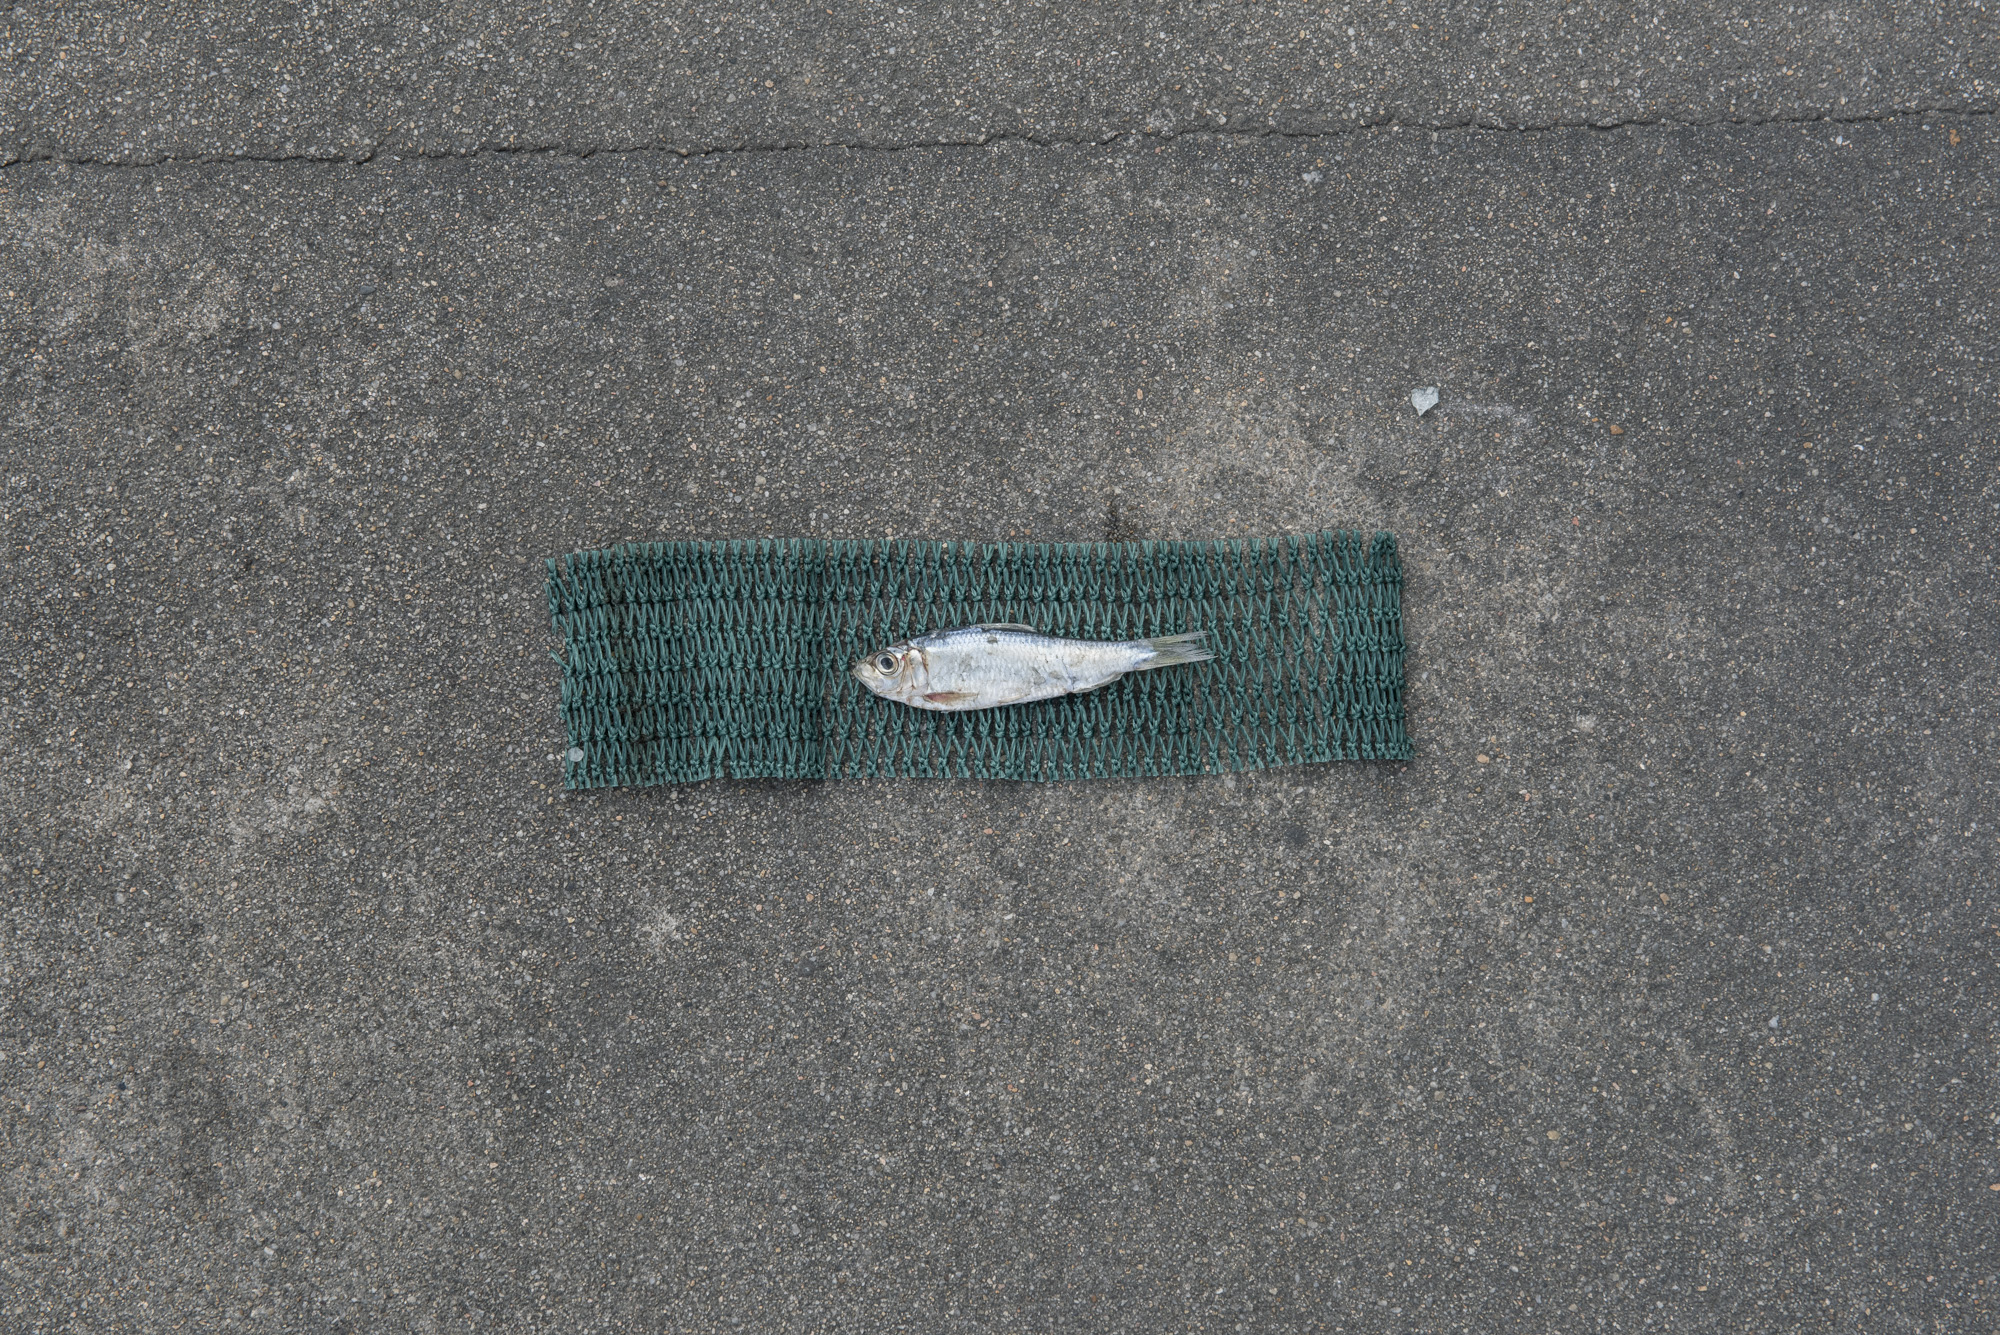  Size of juvenile Japanese scaled sardine caught for fish feed (4.5cm) versus size of average adult Japanese scaled sardine (9.5cm, as represented by green net below fish) 